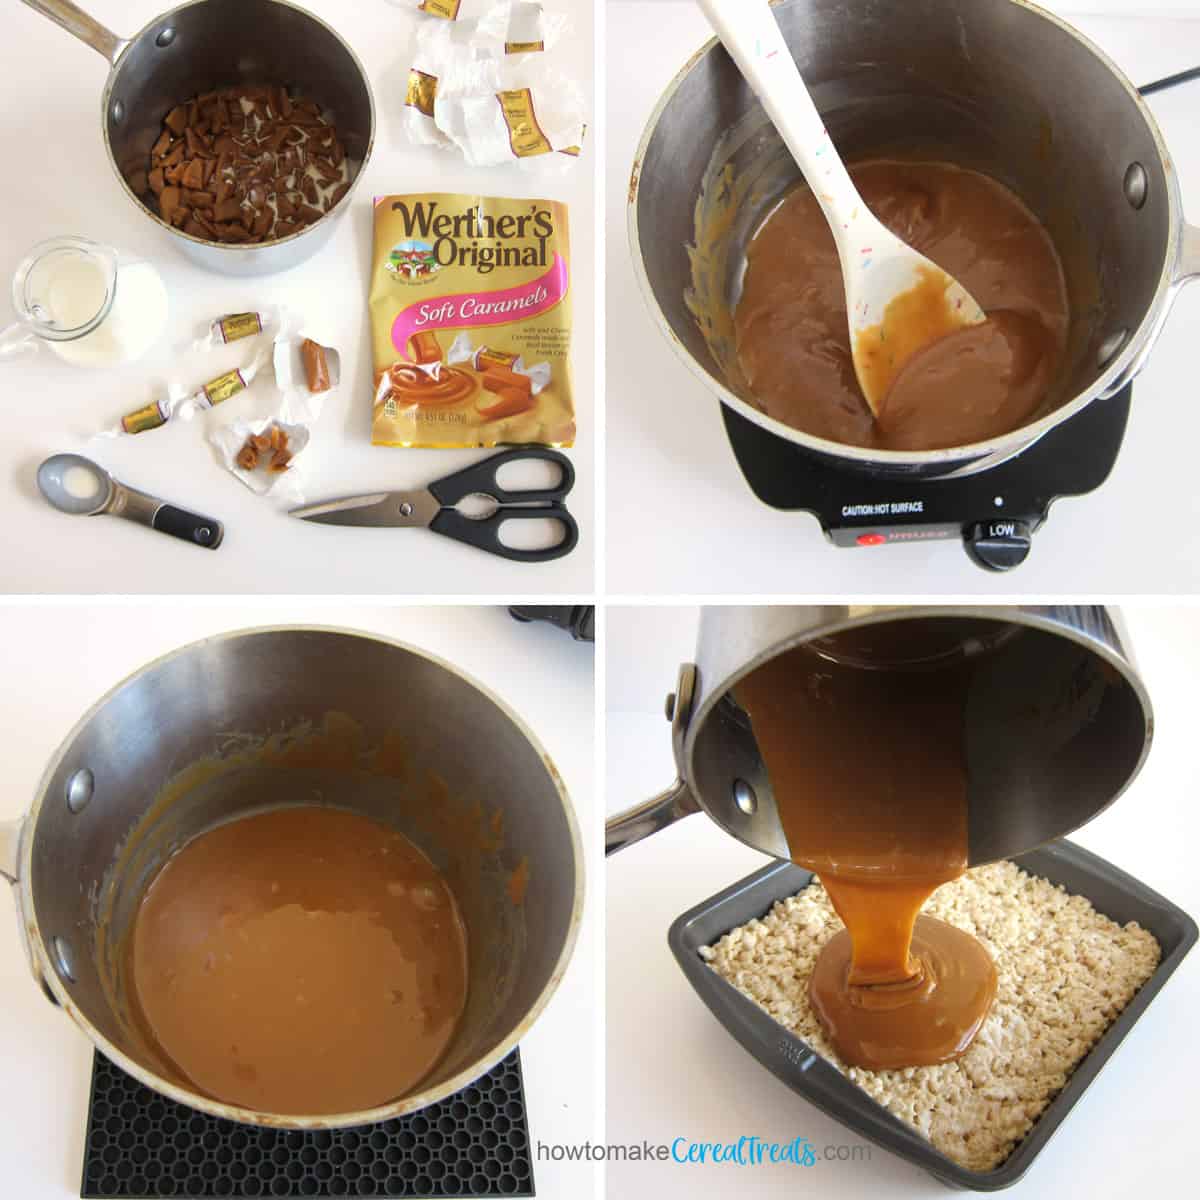 melt Werther's Original Soft Caramels and heavy whipping cream then pour over a pan of Rice Krispie Treats